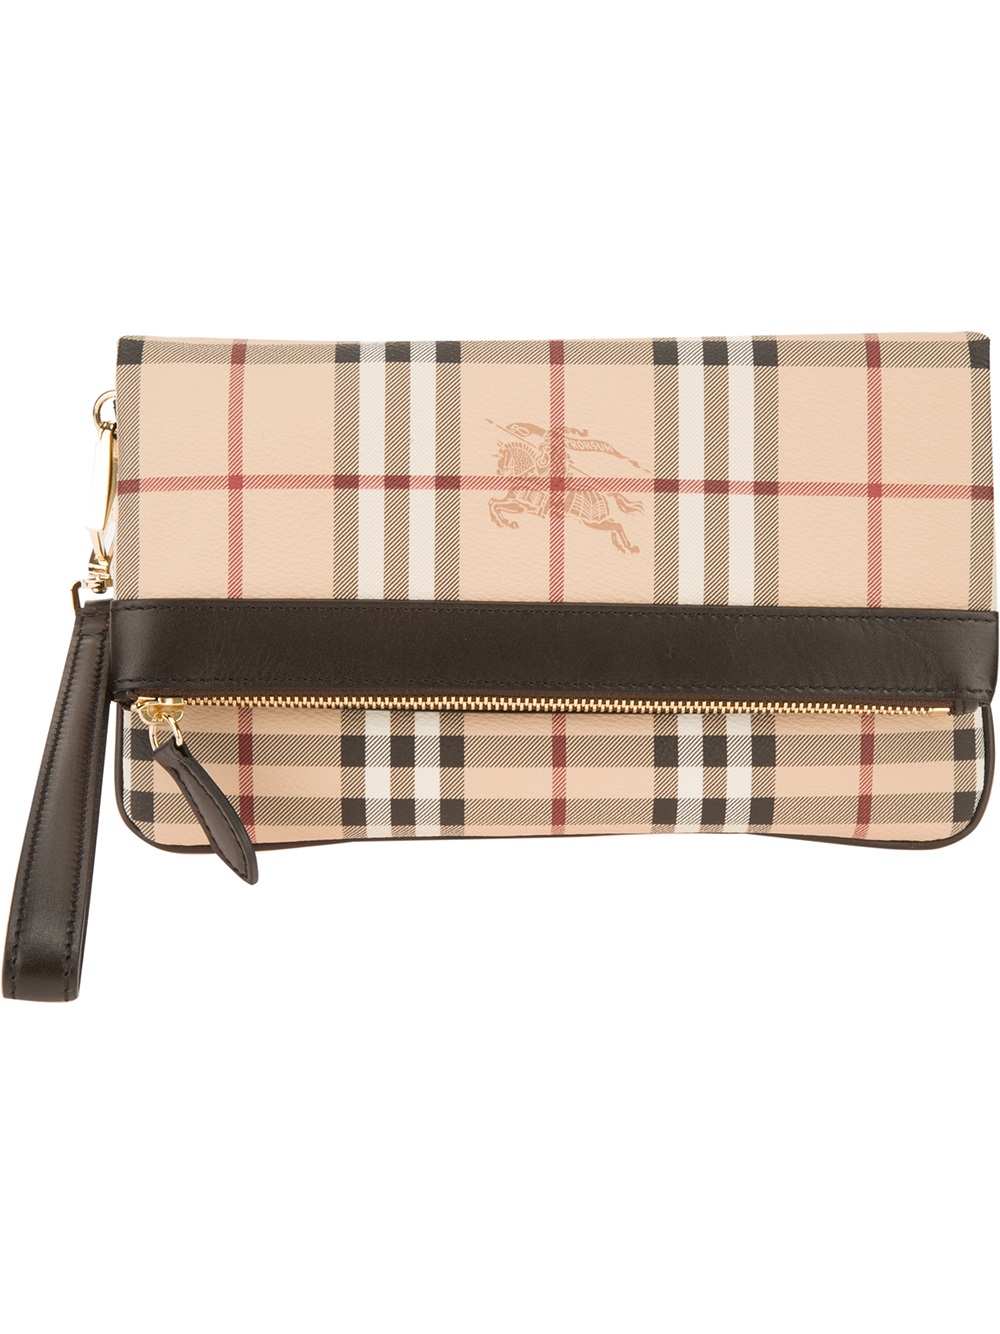 Burberry 'haymarket' Check Folding Wristlet Clutch in Natural | Lyst